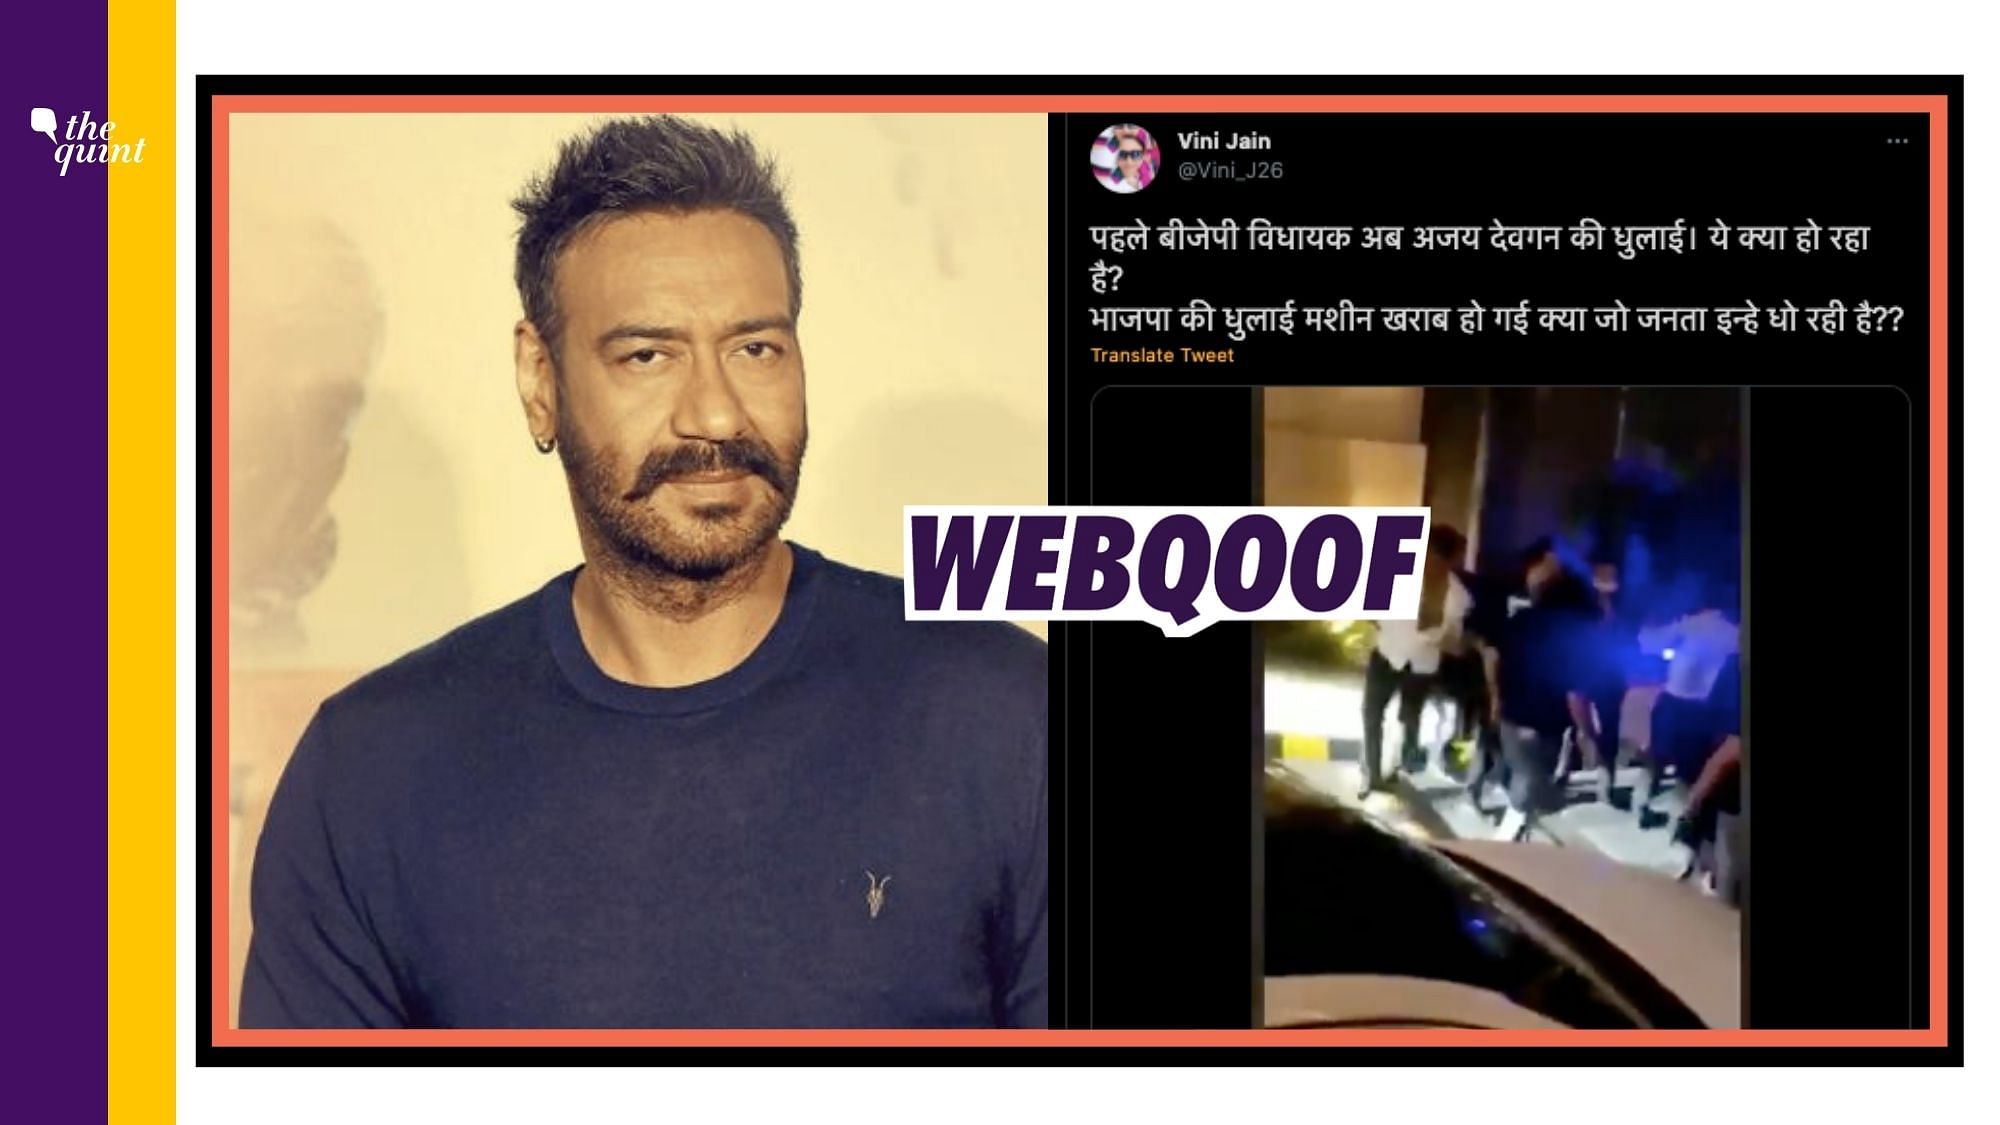 A viral video showing altercation between a group of people is being shared on social media with a claim that it shows <a href="https://www.thequint.com/topic/farmers-protest">protesting farmers</a> thrashing actor Ajay Devgn.